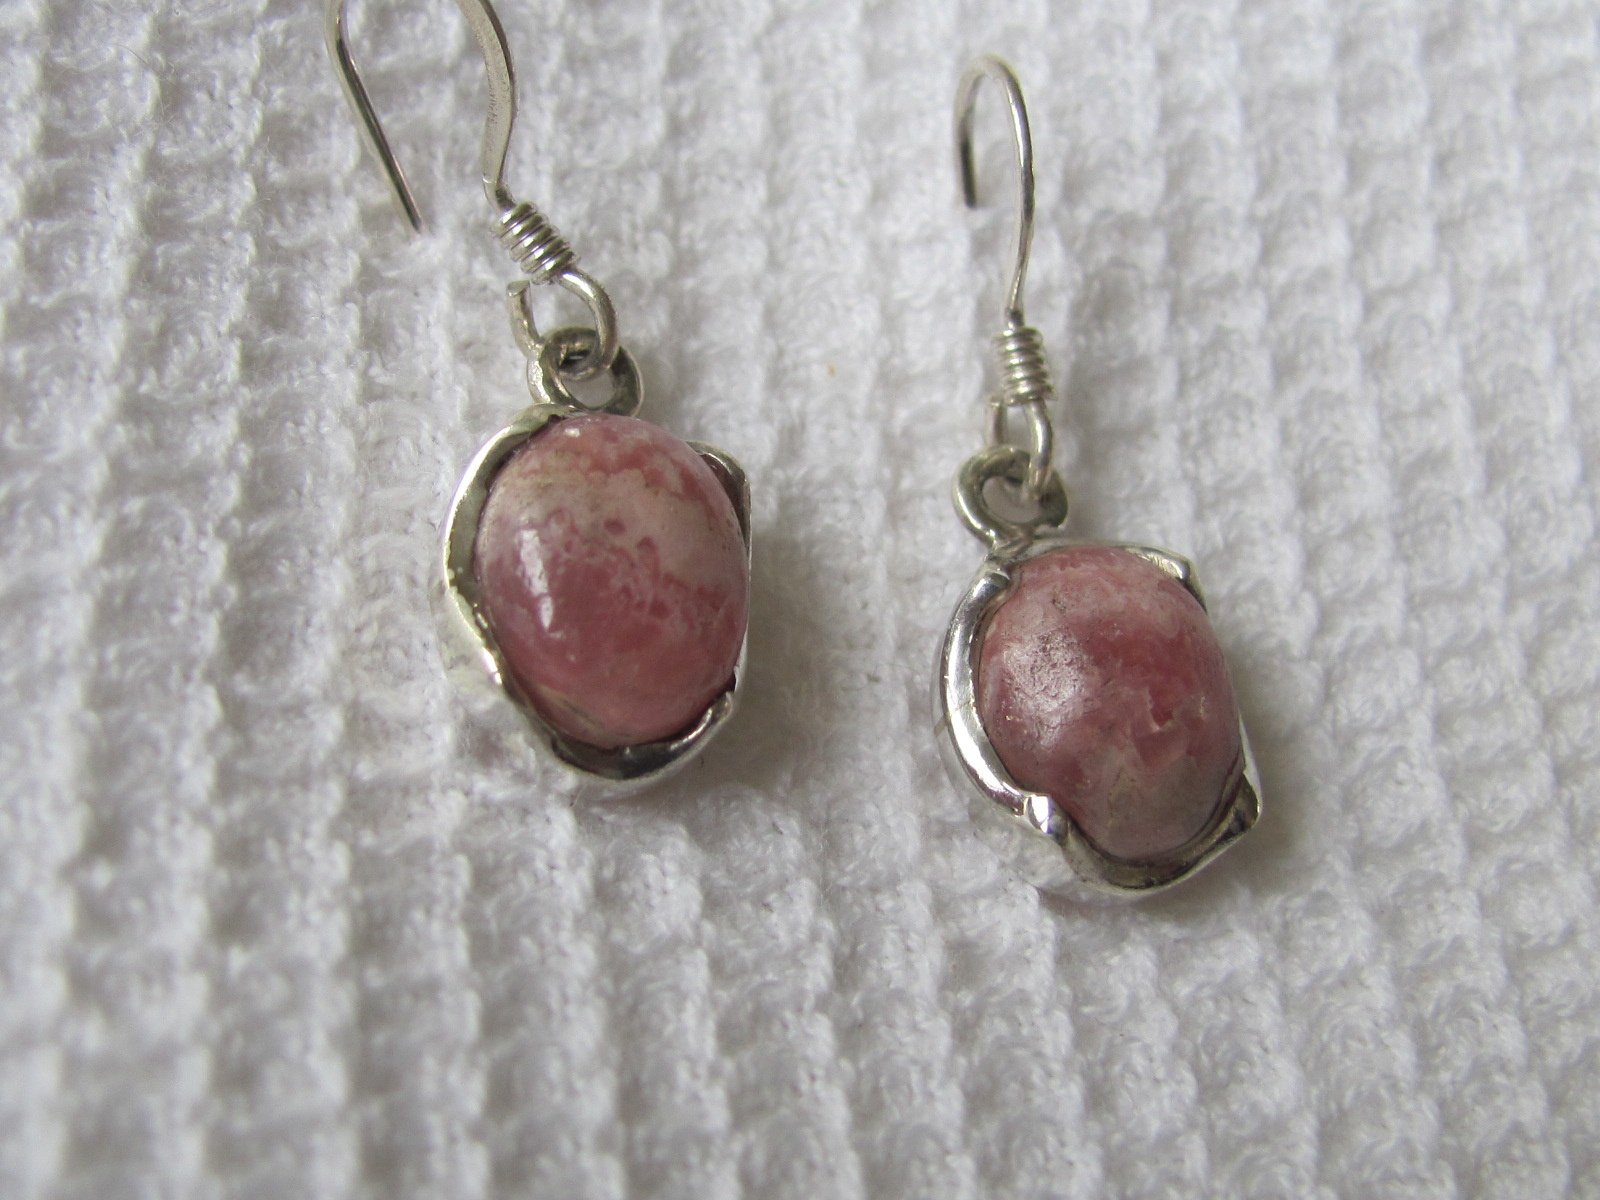 Earring silver with  rhodocrosite